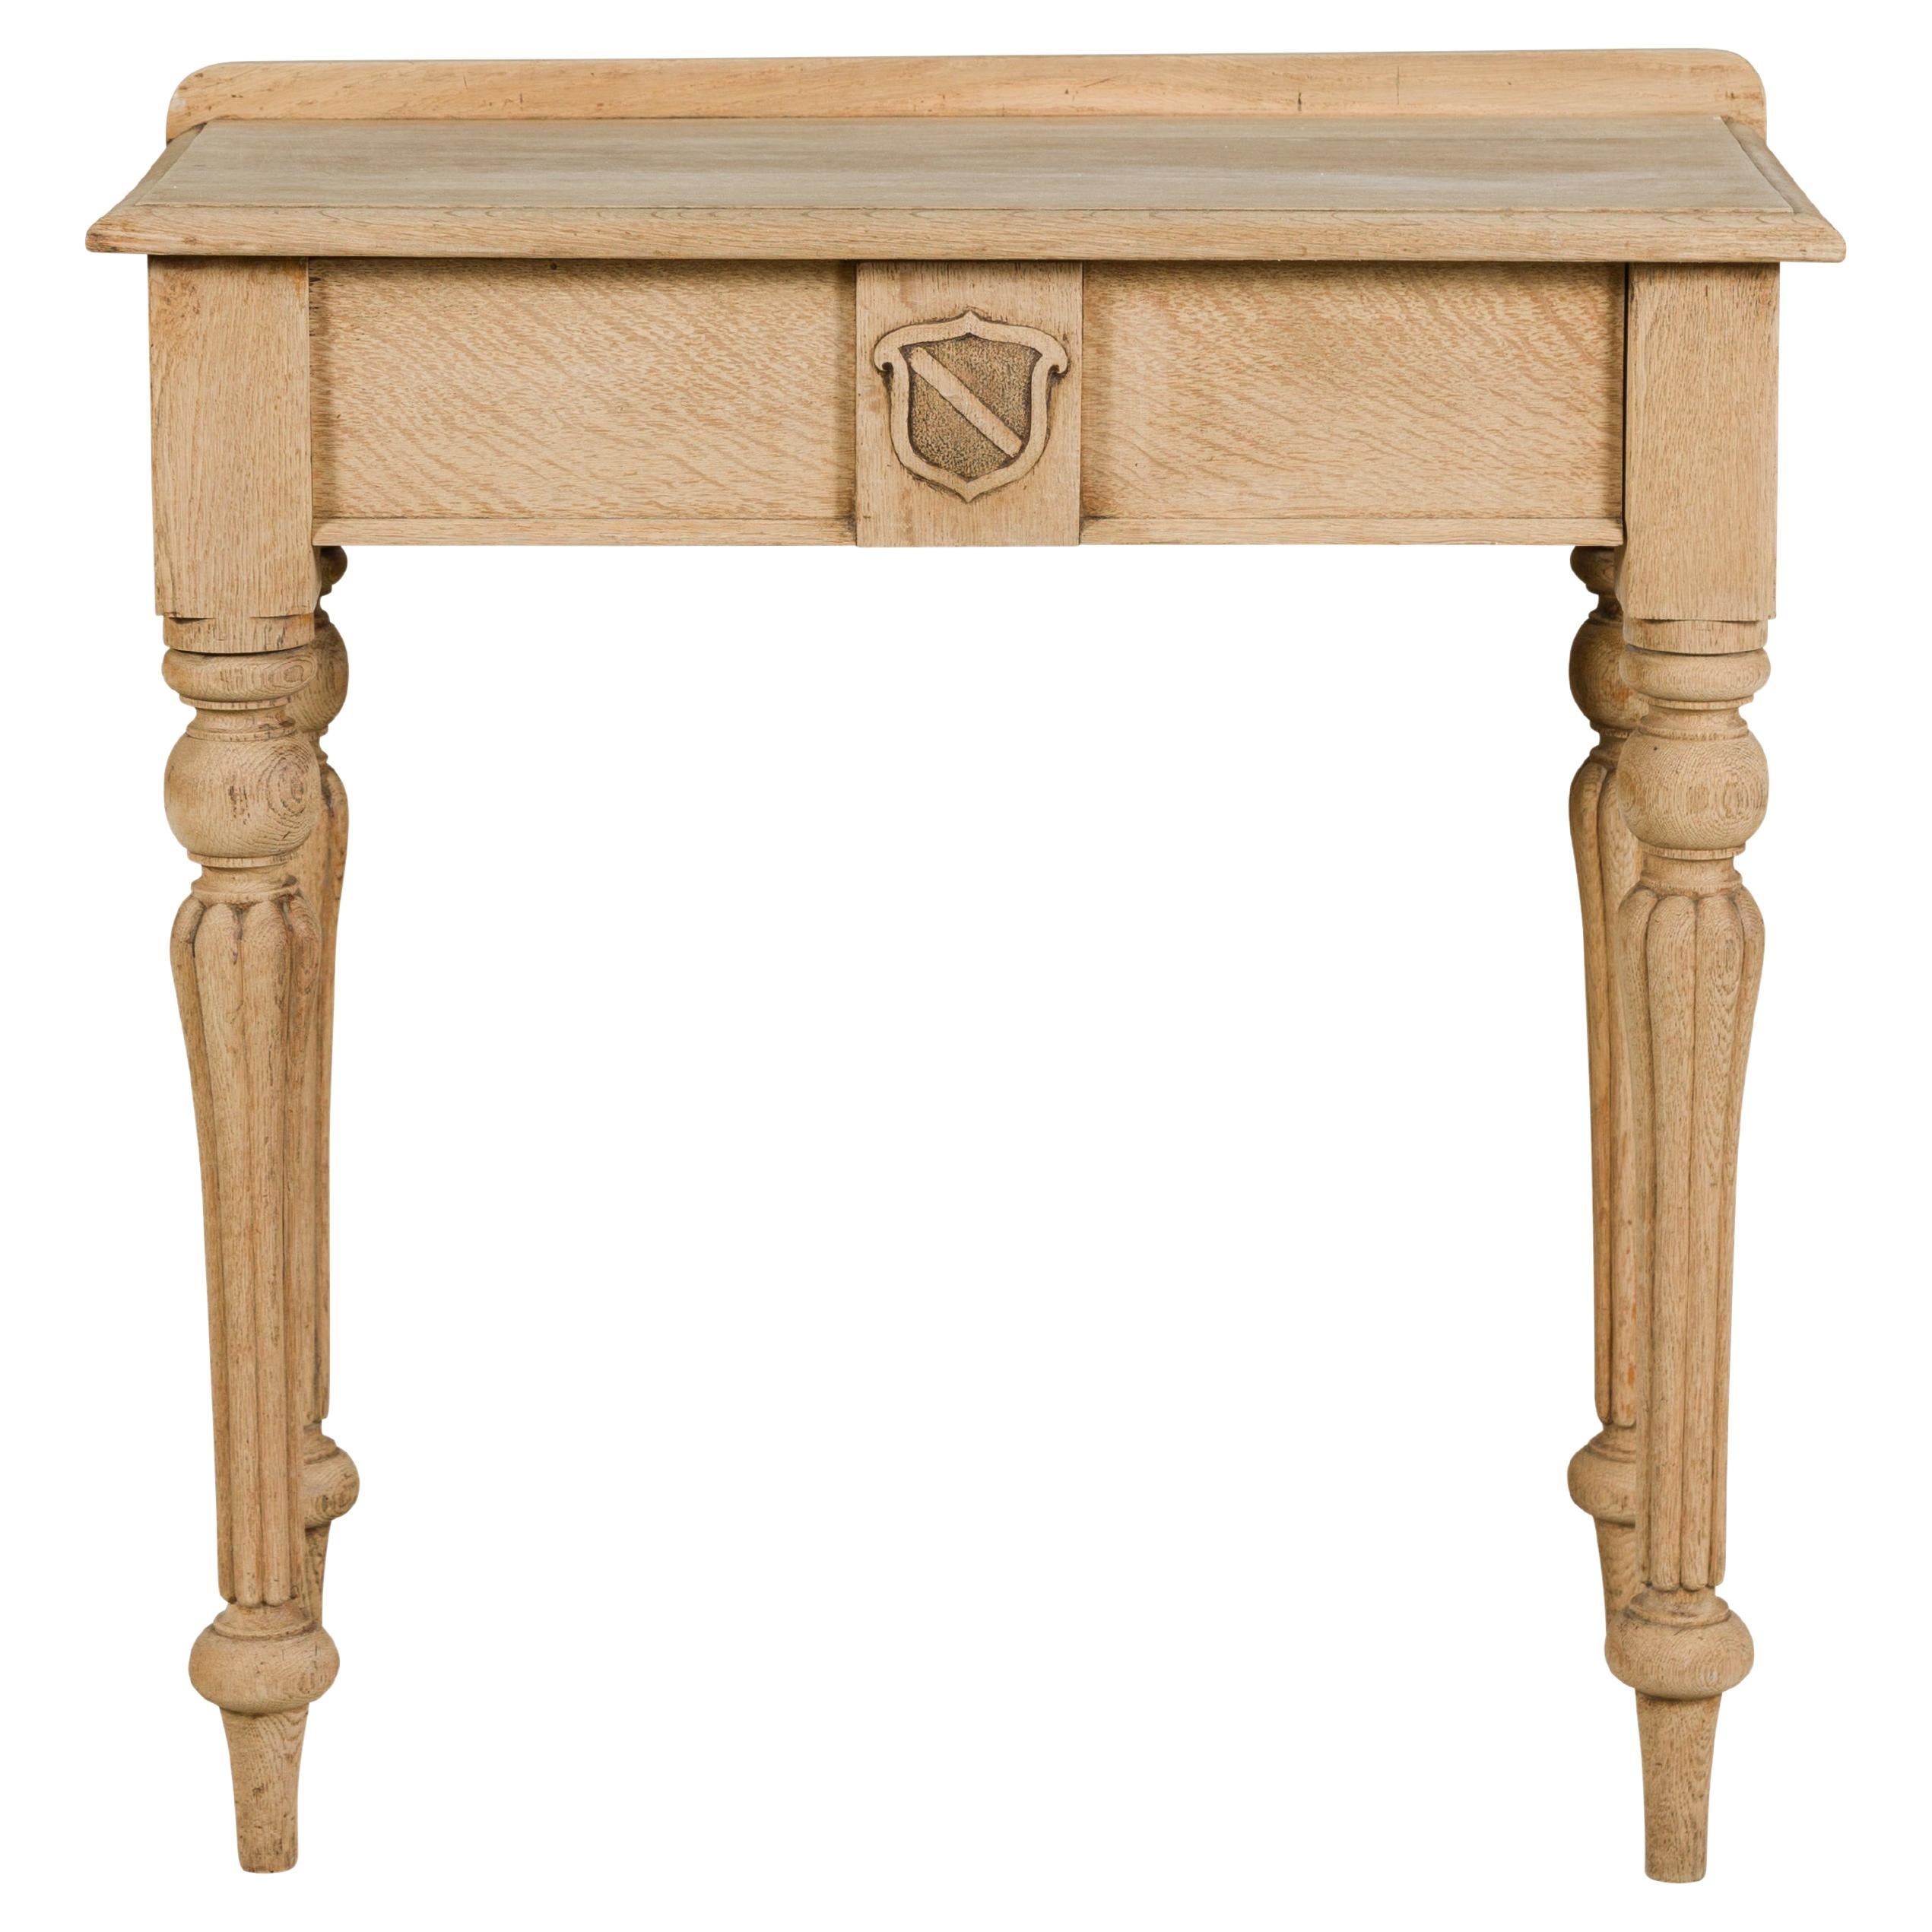 19th Century English Bleached Oak Side Table with Carved Shield Motif